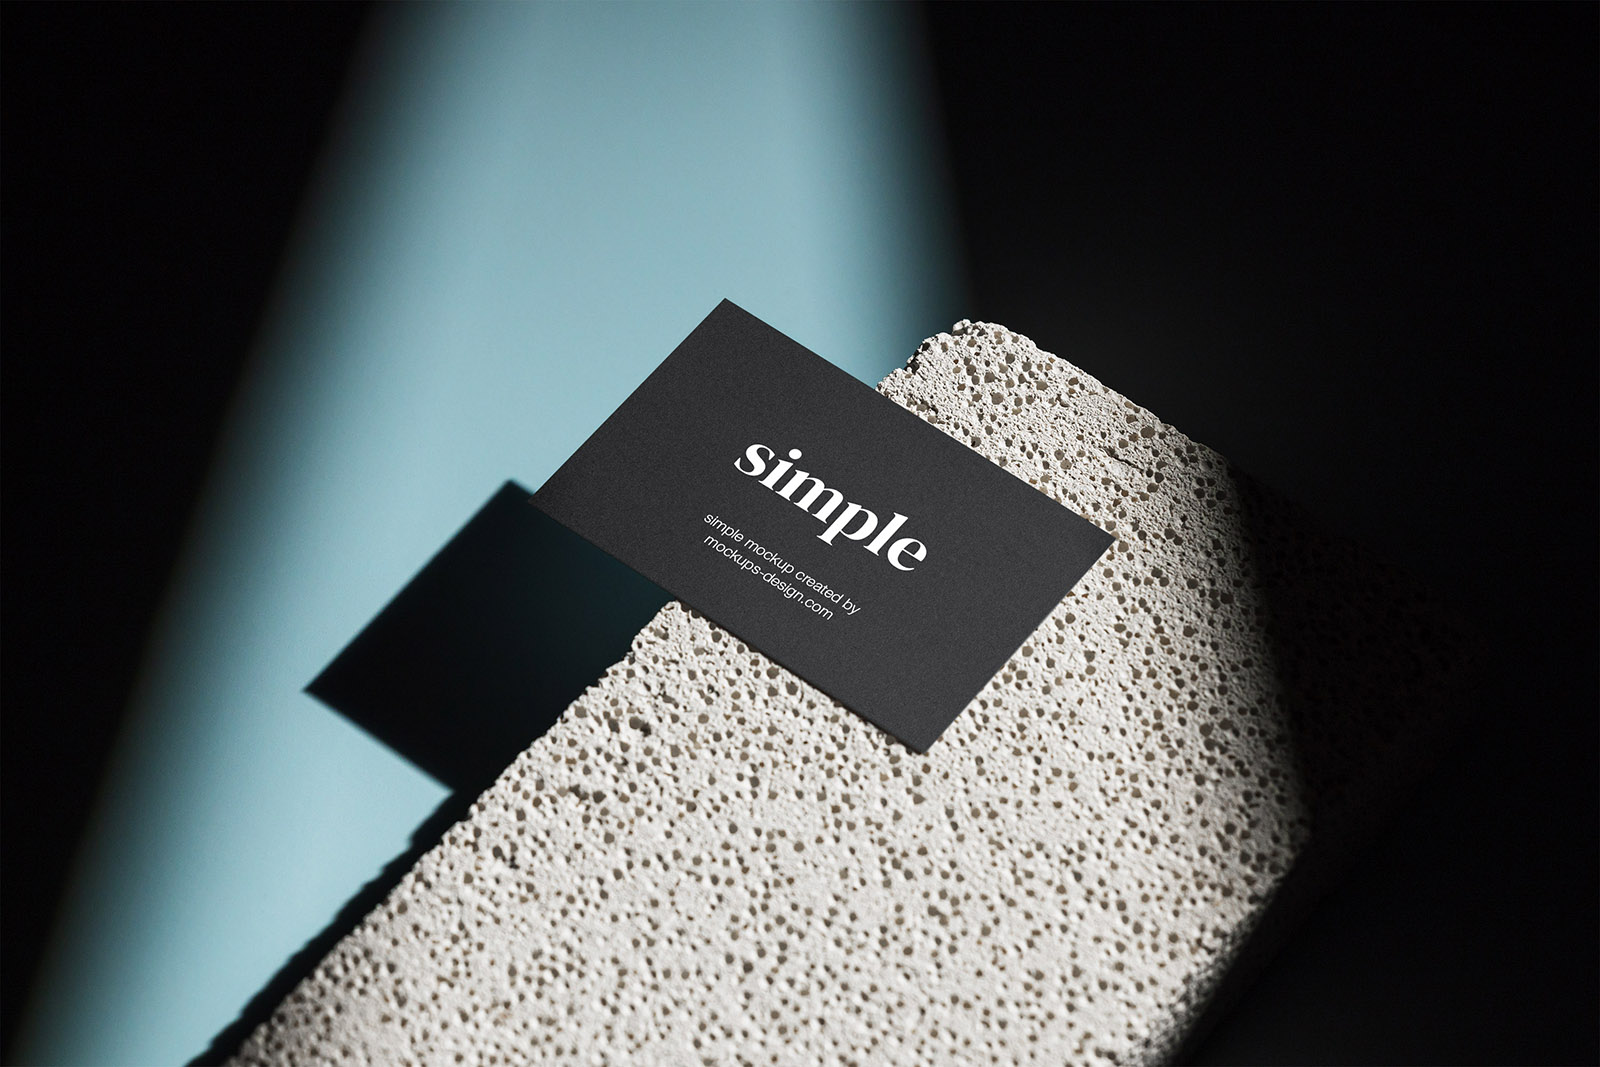 Business card on the white stone tile mockup